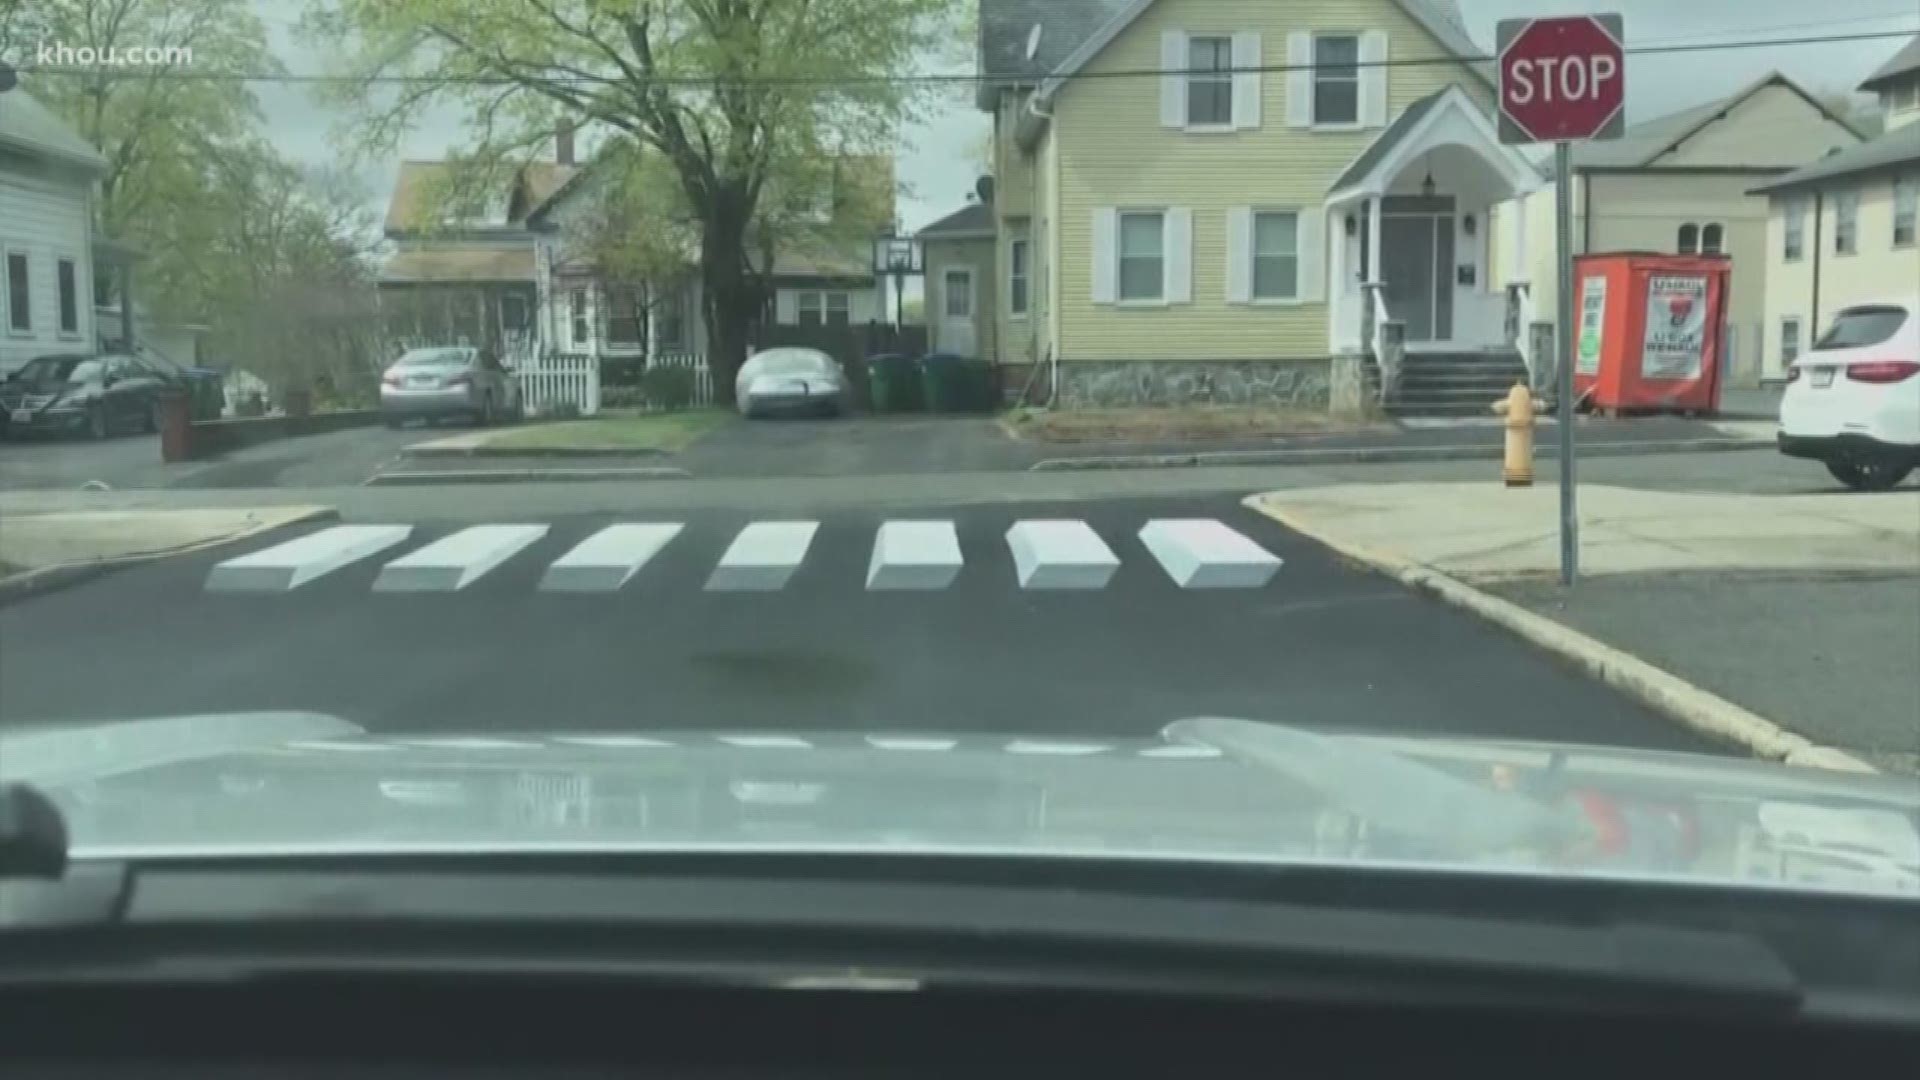 Massachusetts students worked with the city's bureaucracy to design a 3D crosswalk.